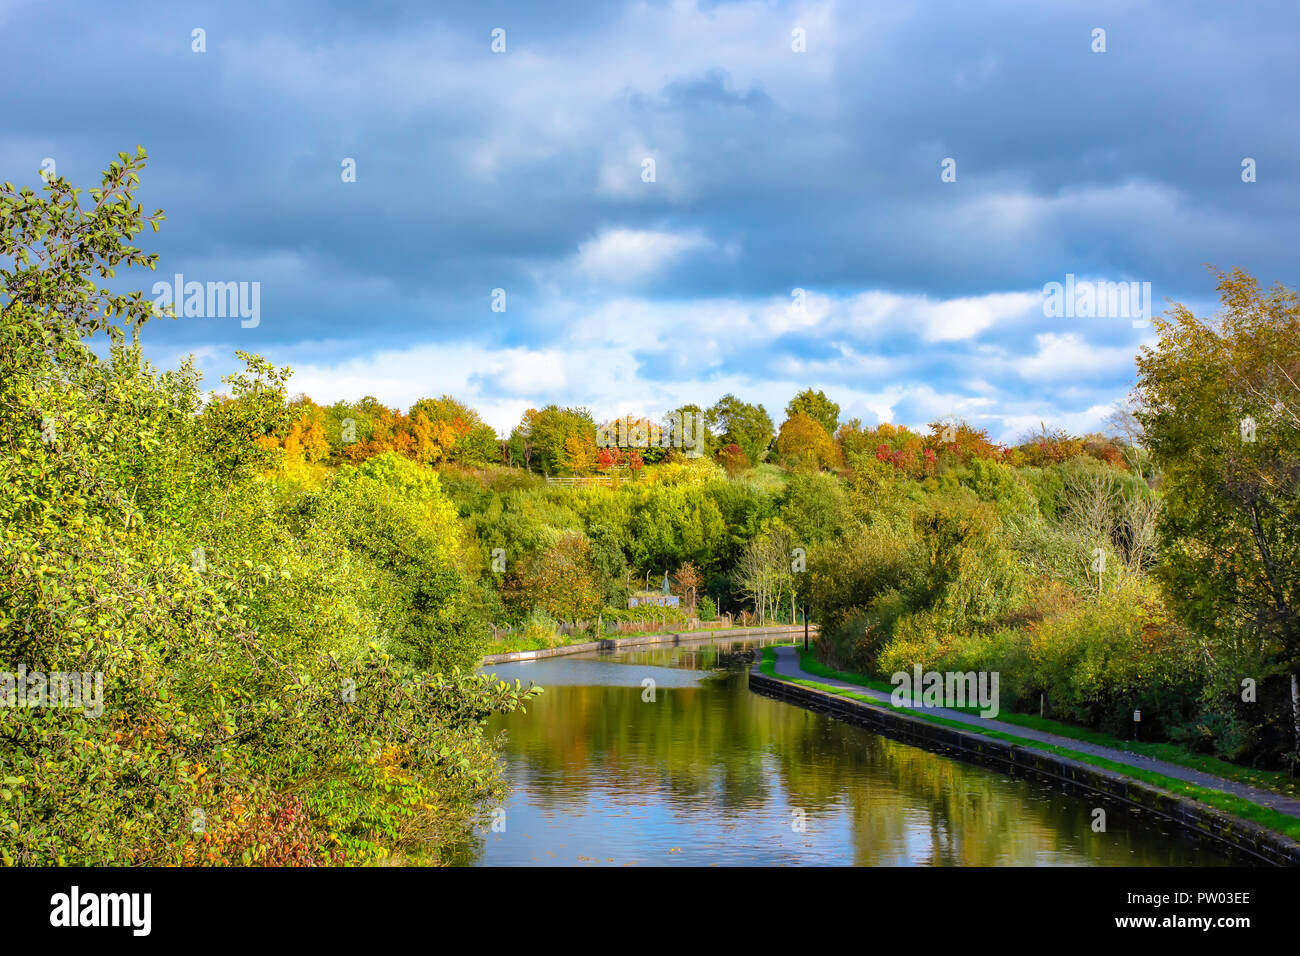 British landscape.Trent and Mersey canal in Stoke on Trent, Staffordshire,Uk on autumn day.Trees with leaves changing color reflections in water. Stock Photo